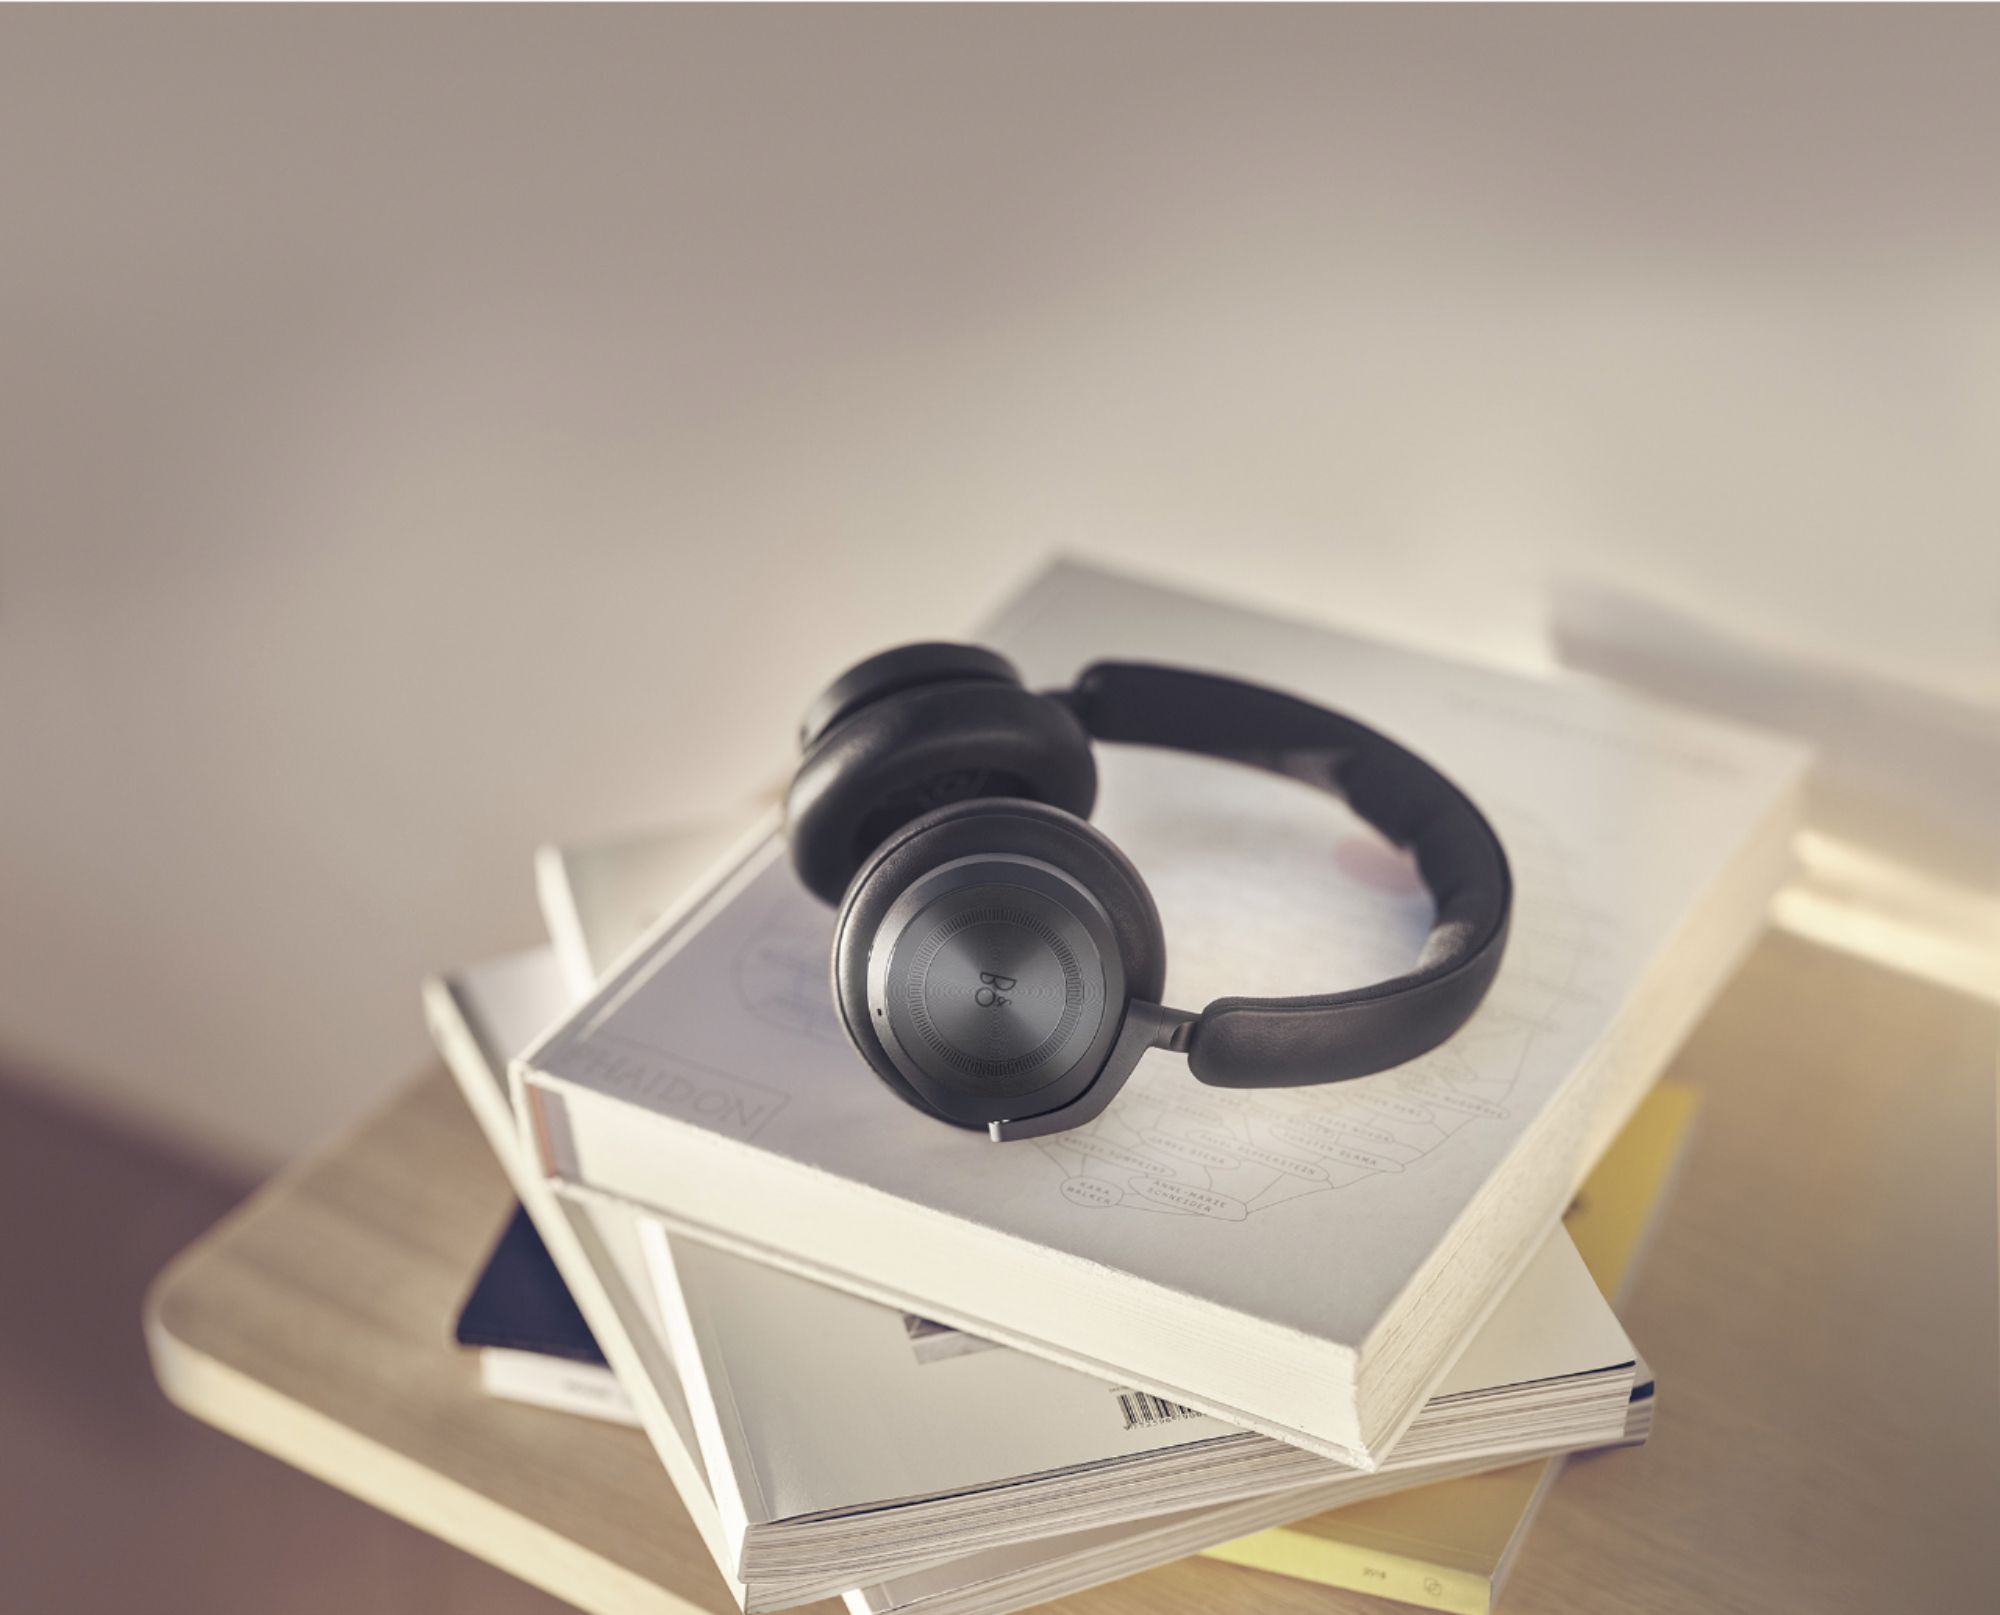 Bang & Olufsen Beoplay HX desde 499,00 €